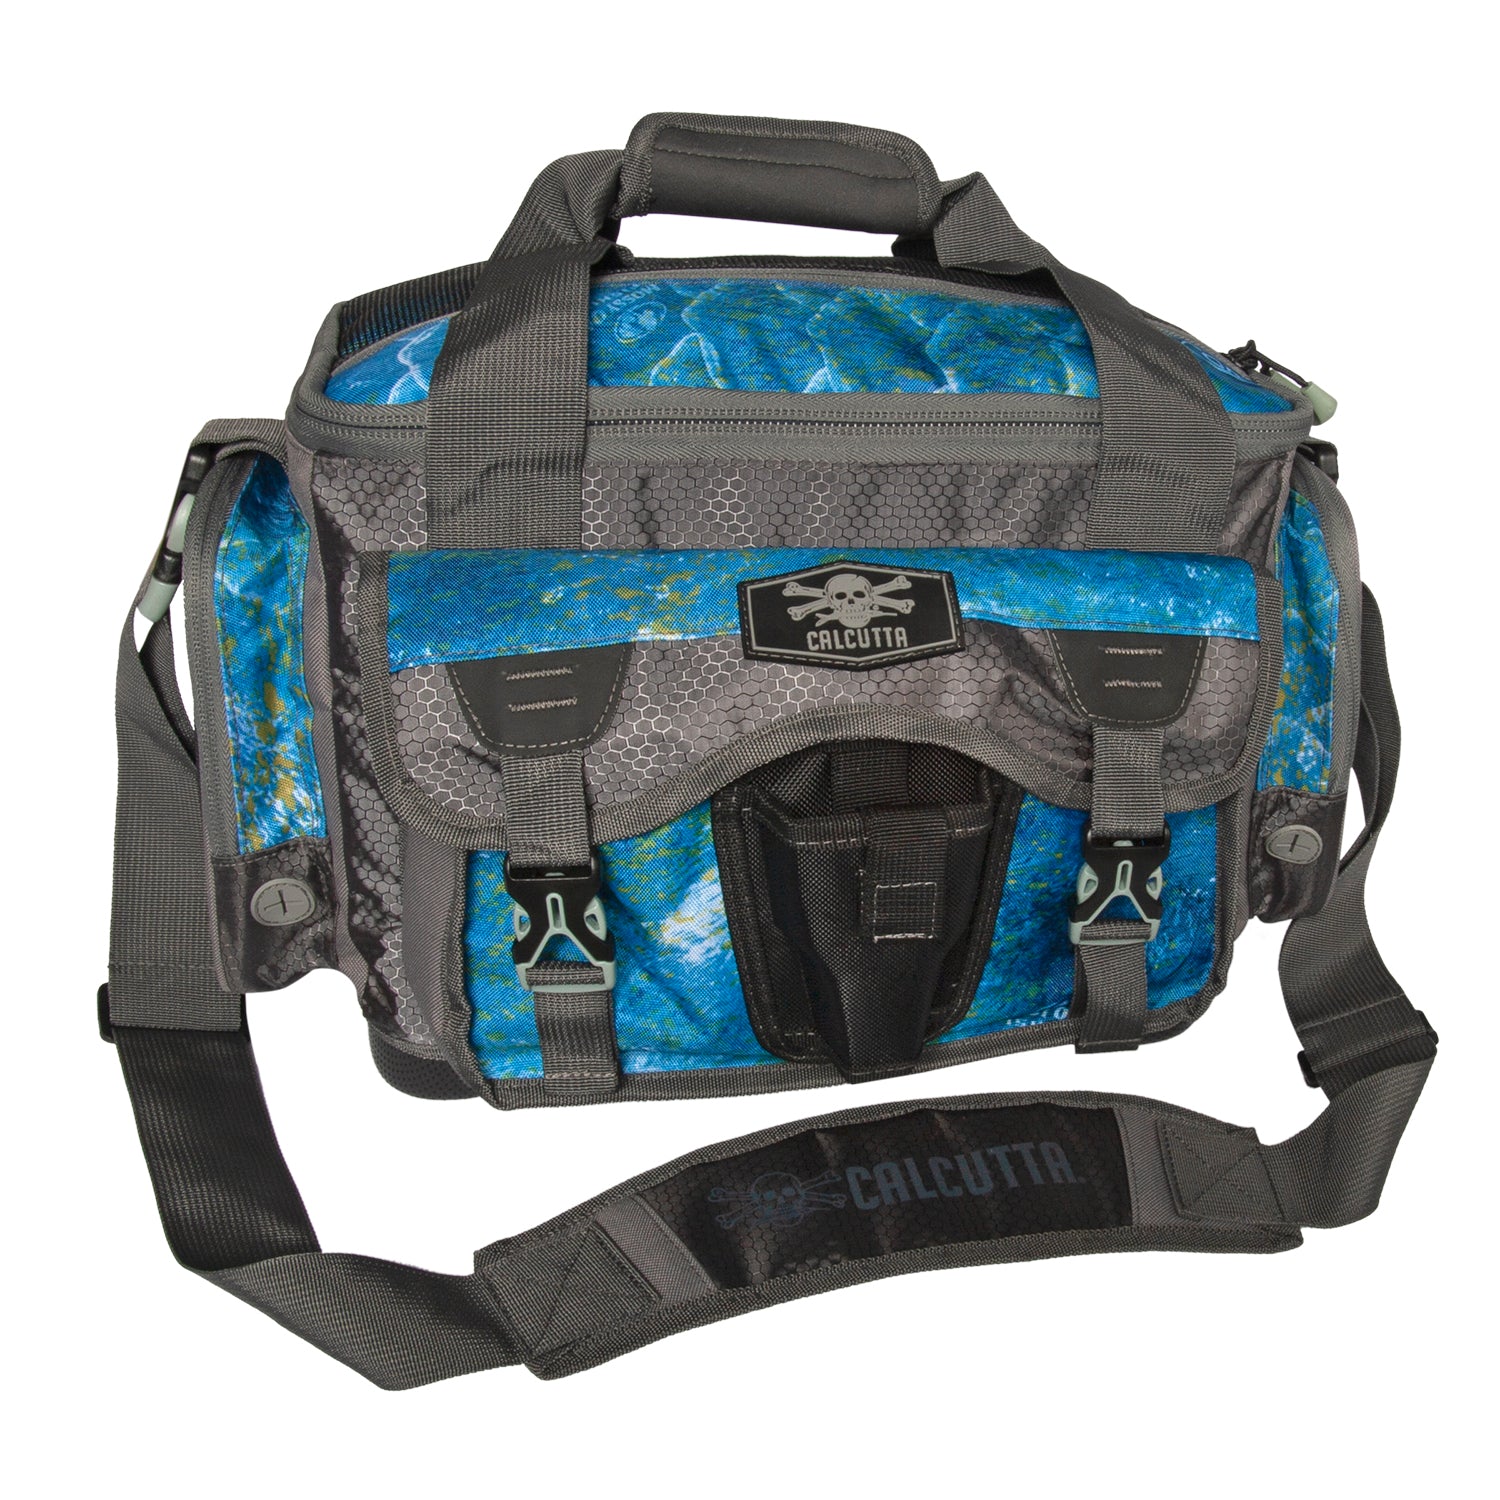  Tackle Storage Bags & Wraps - Fishing: Sports & Outdoors